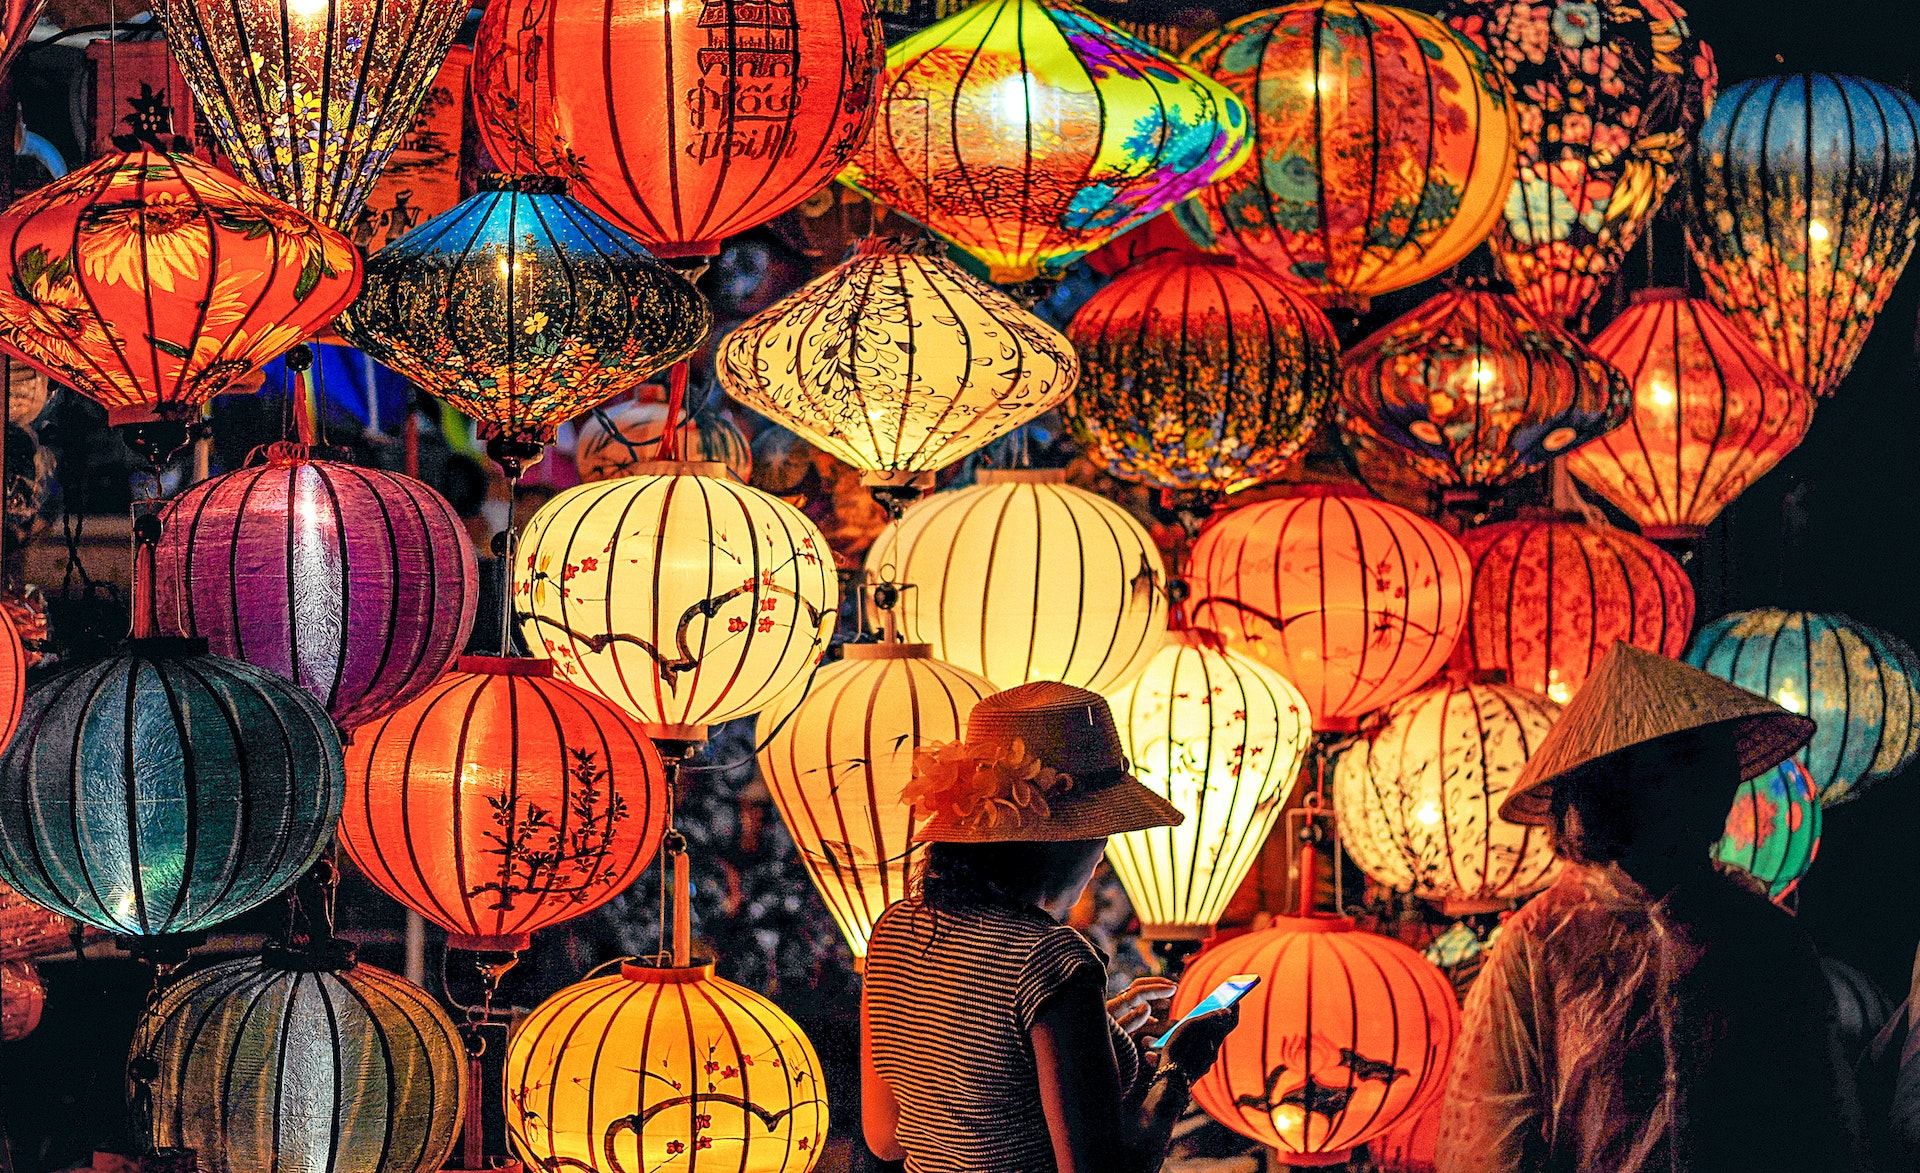 Experience the magic of Hoi An's lantern festival with Vietnam tour packages from Singapore